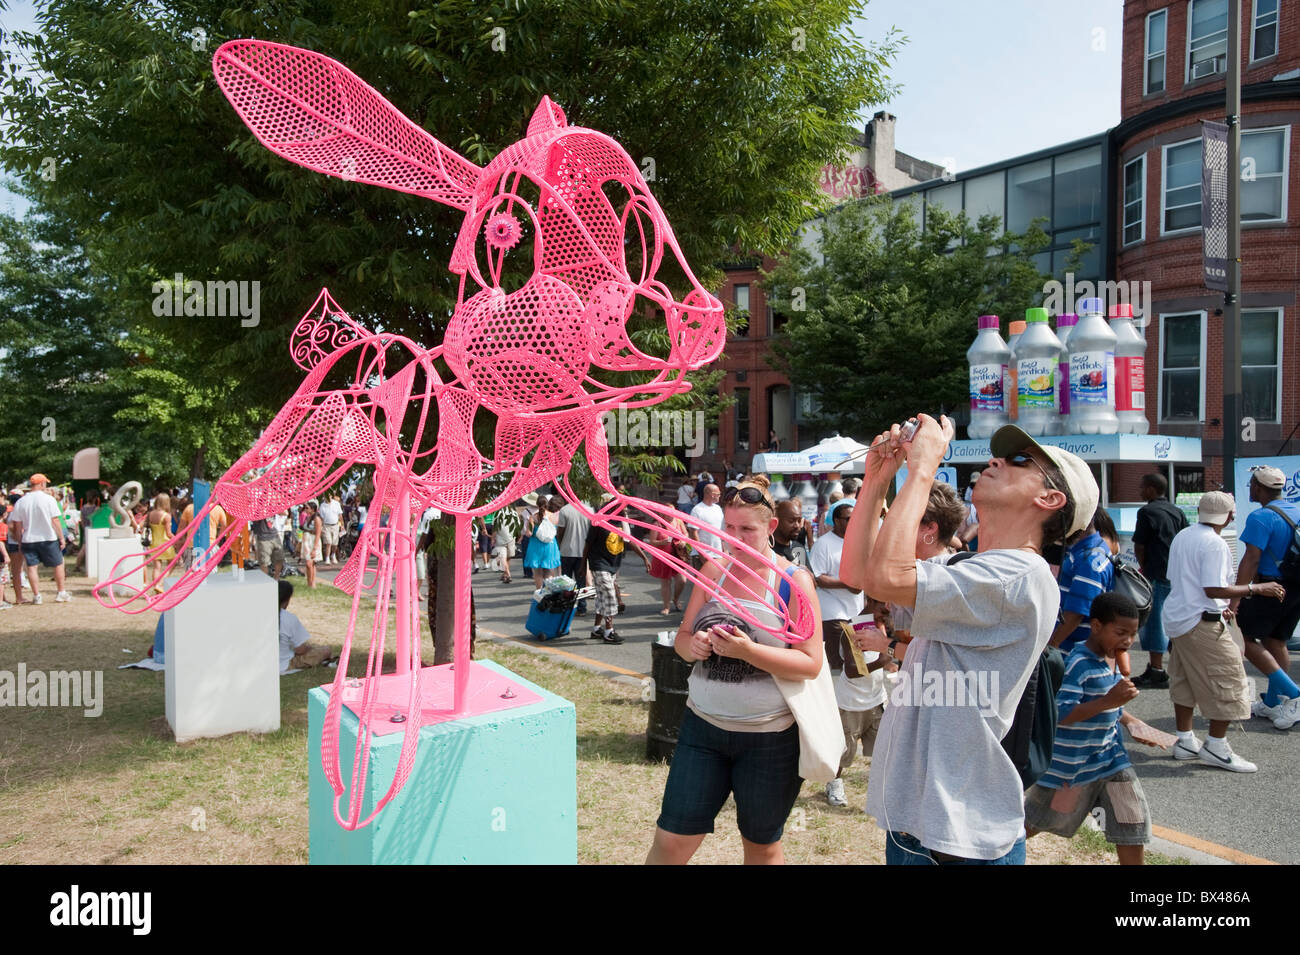 Pink bunny sculpture at Artscape arts festival, Baltimore Maryland Stock Photo